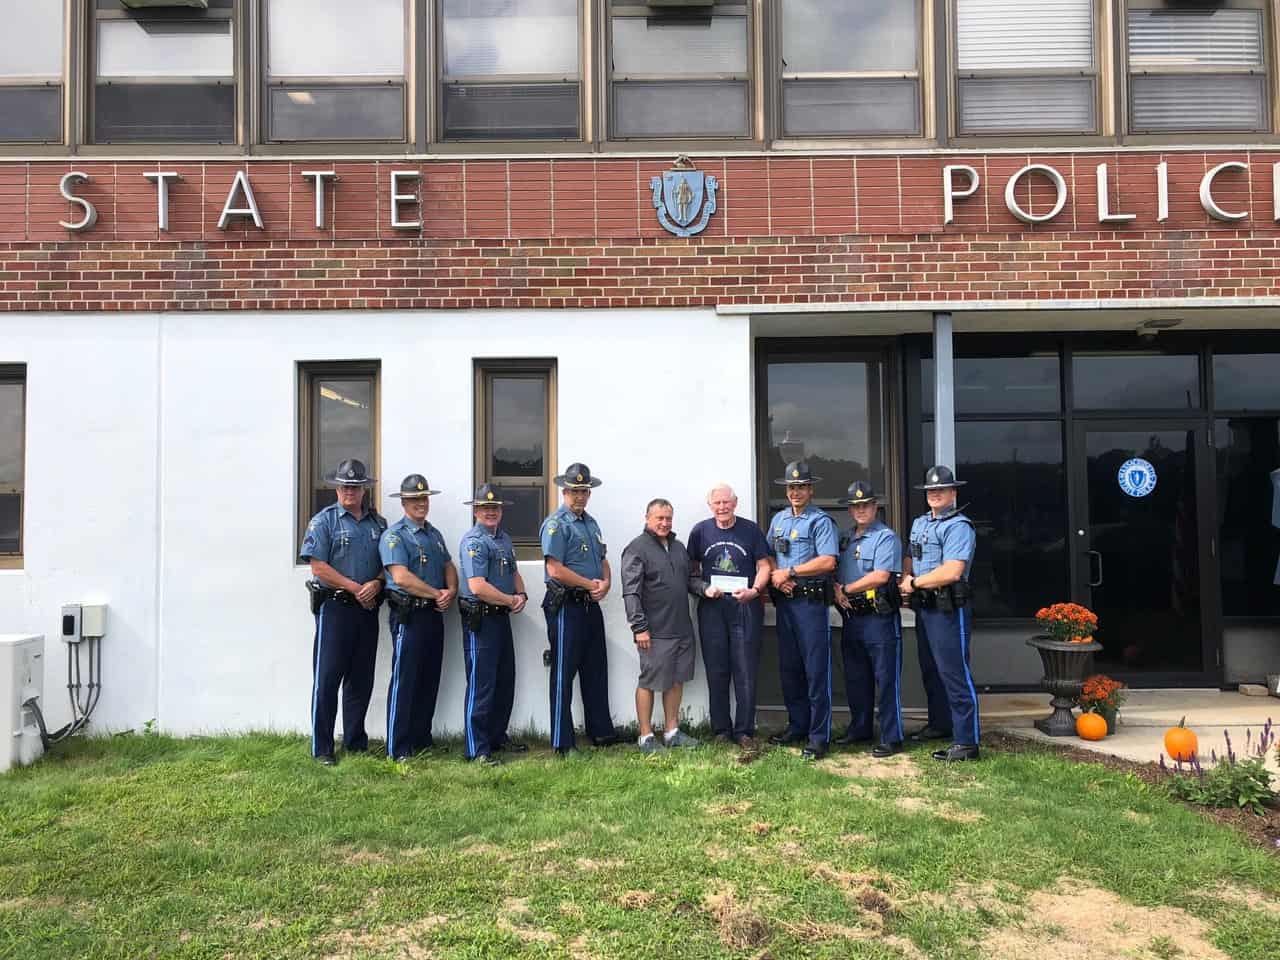 Cops For Kids With Cancer went to the Mass Sate Police barracks in Bourne.